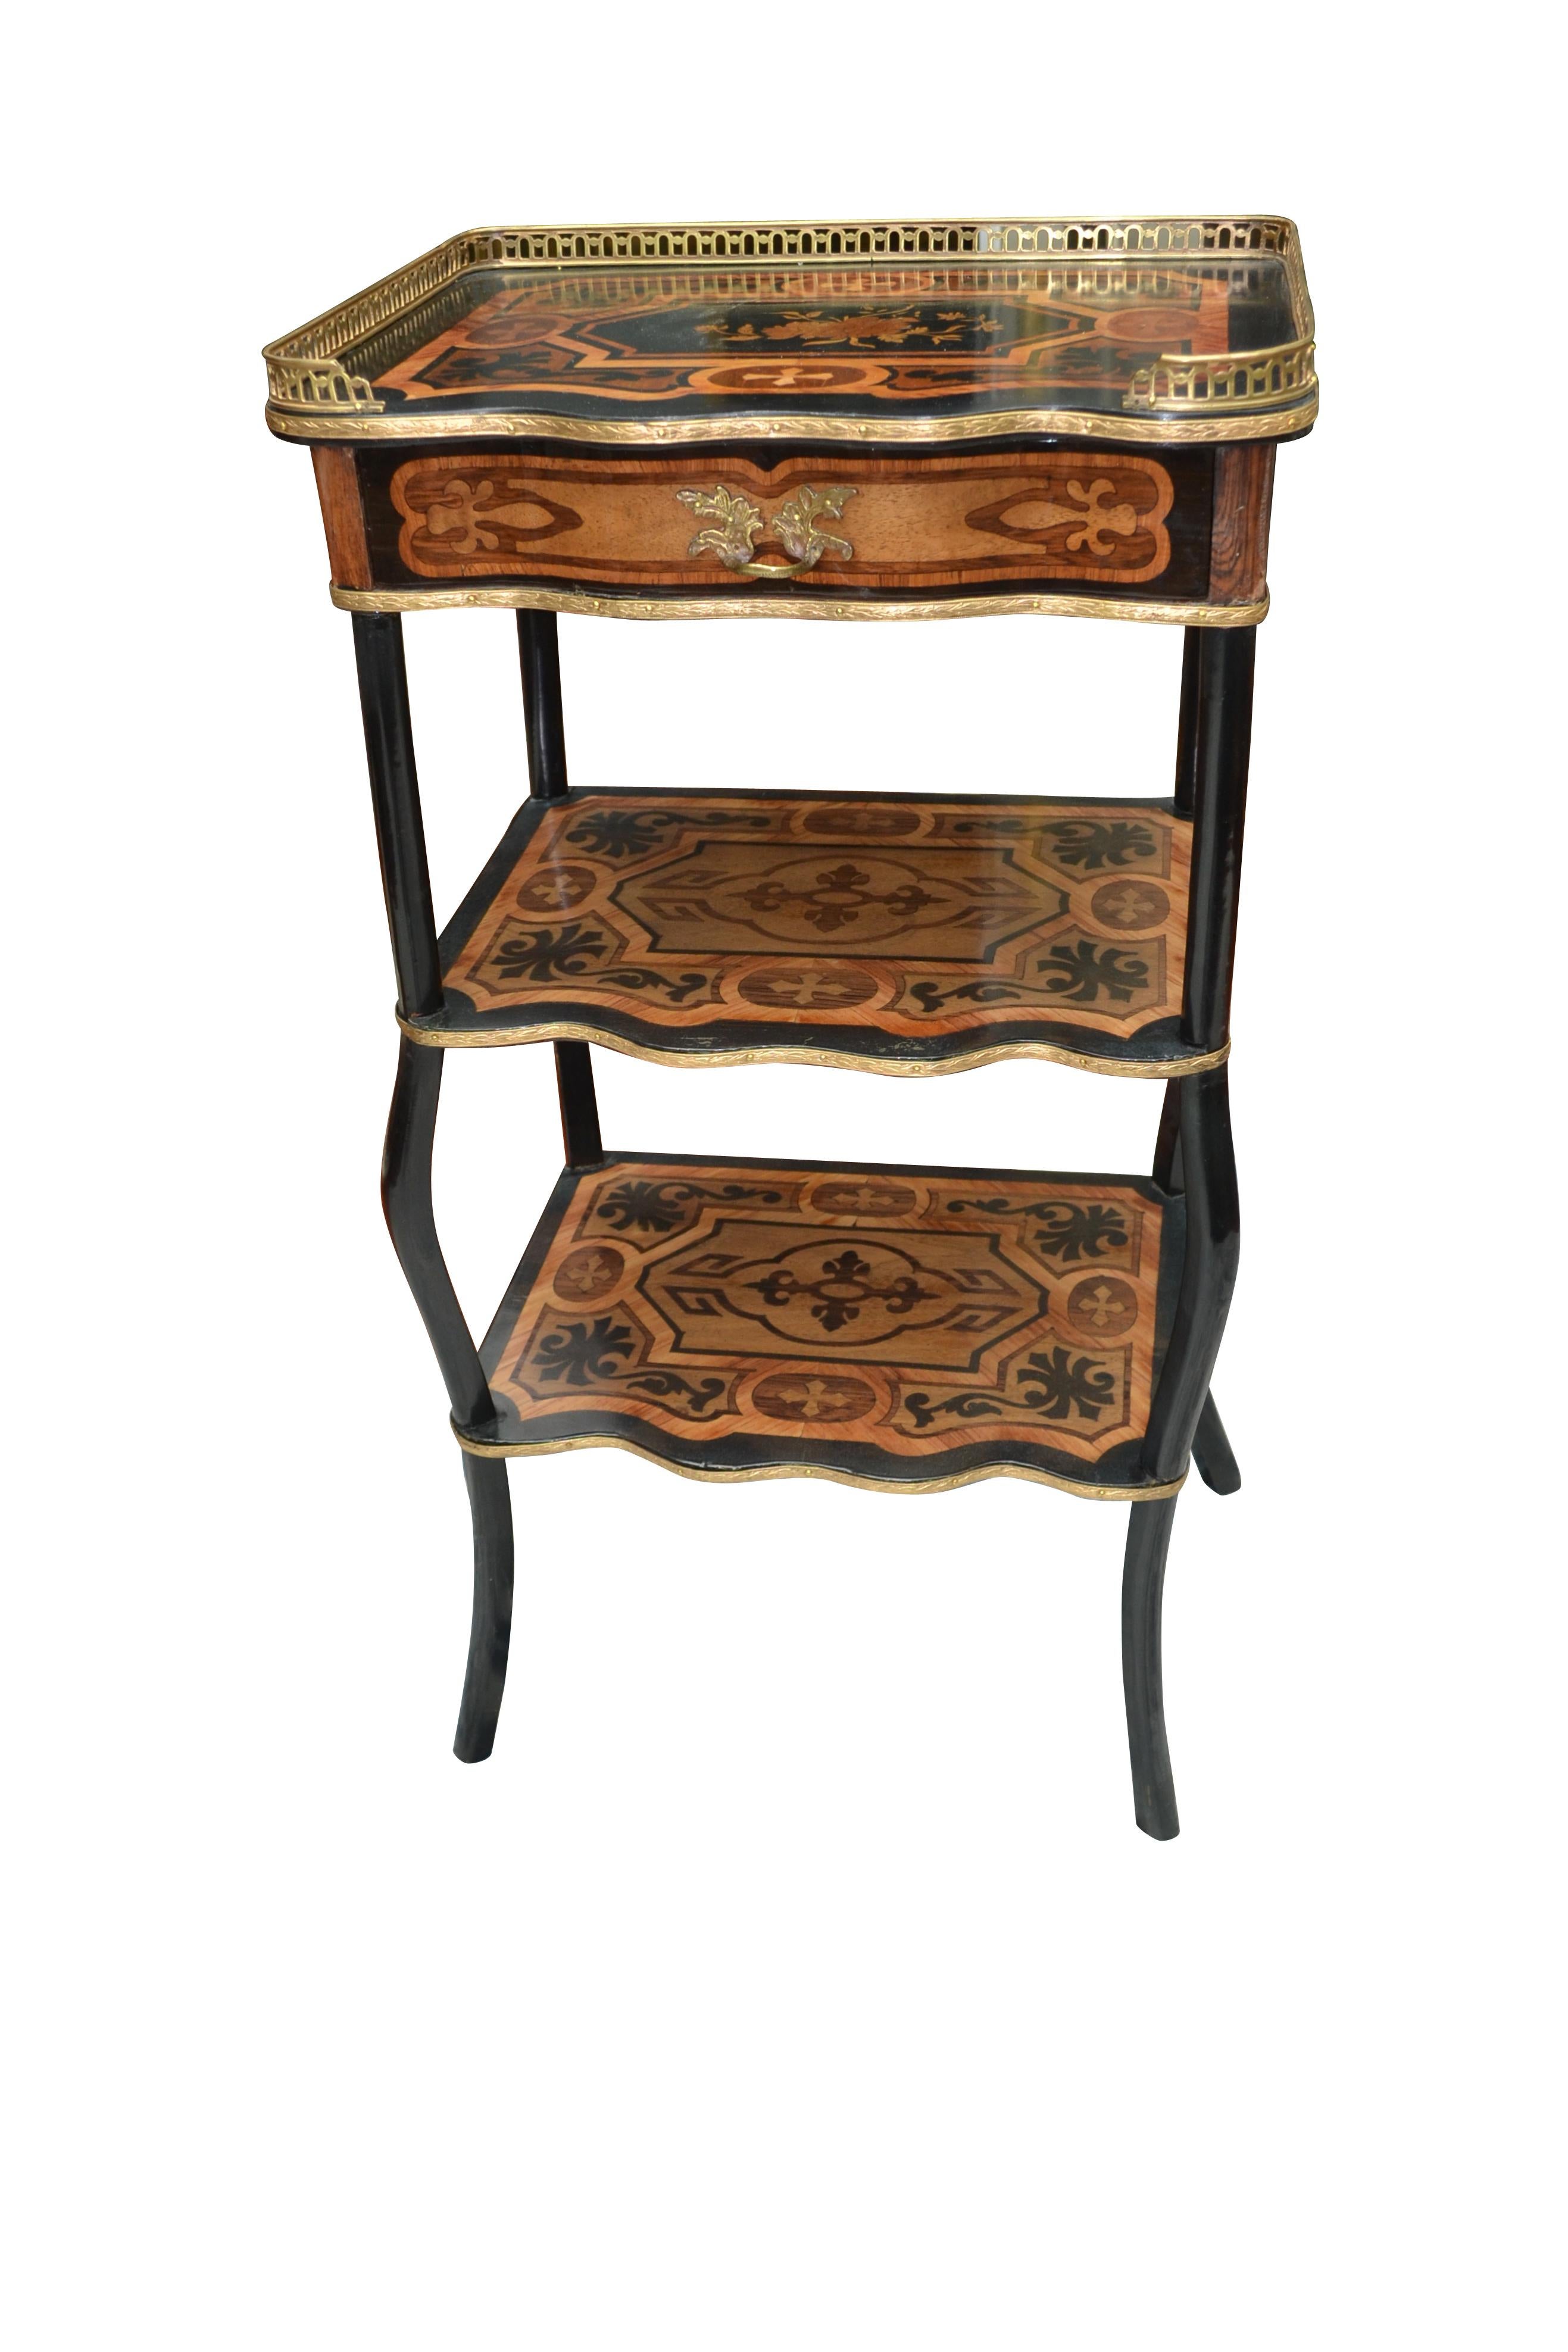 A Napoleon III marquetry side table. The top galleried section with a drawer and the two bottom shelves having overall inlaid exotic wood inlay in a geometric pattern. The top and lower shelves are supported by four curved legs.